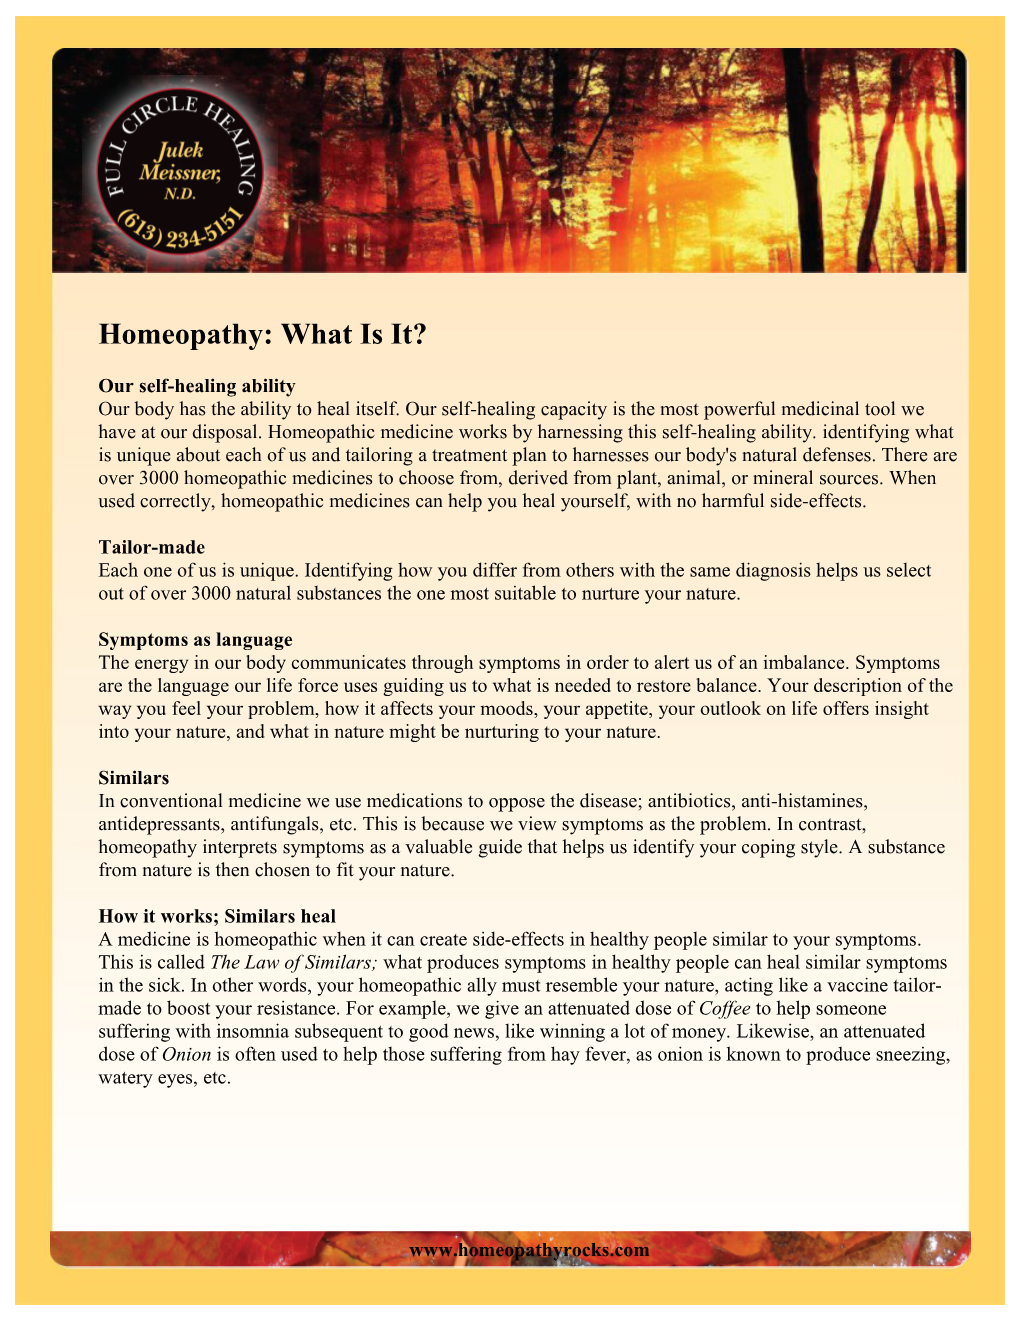 Homeopathy: What Is It?